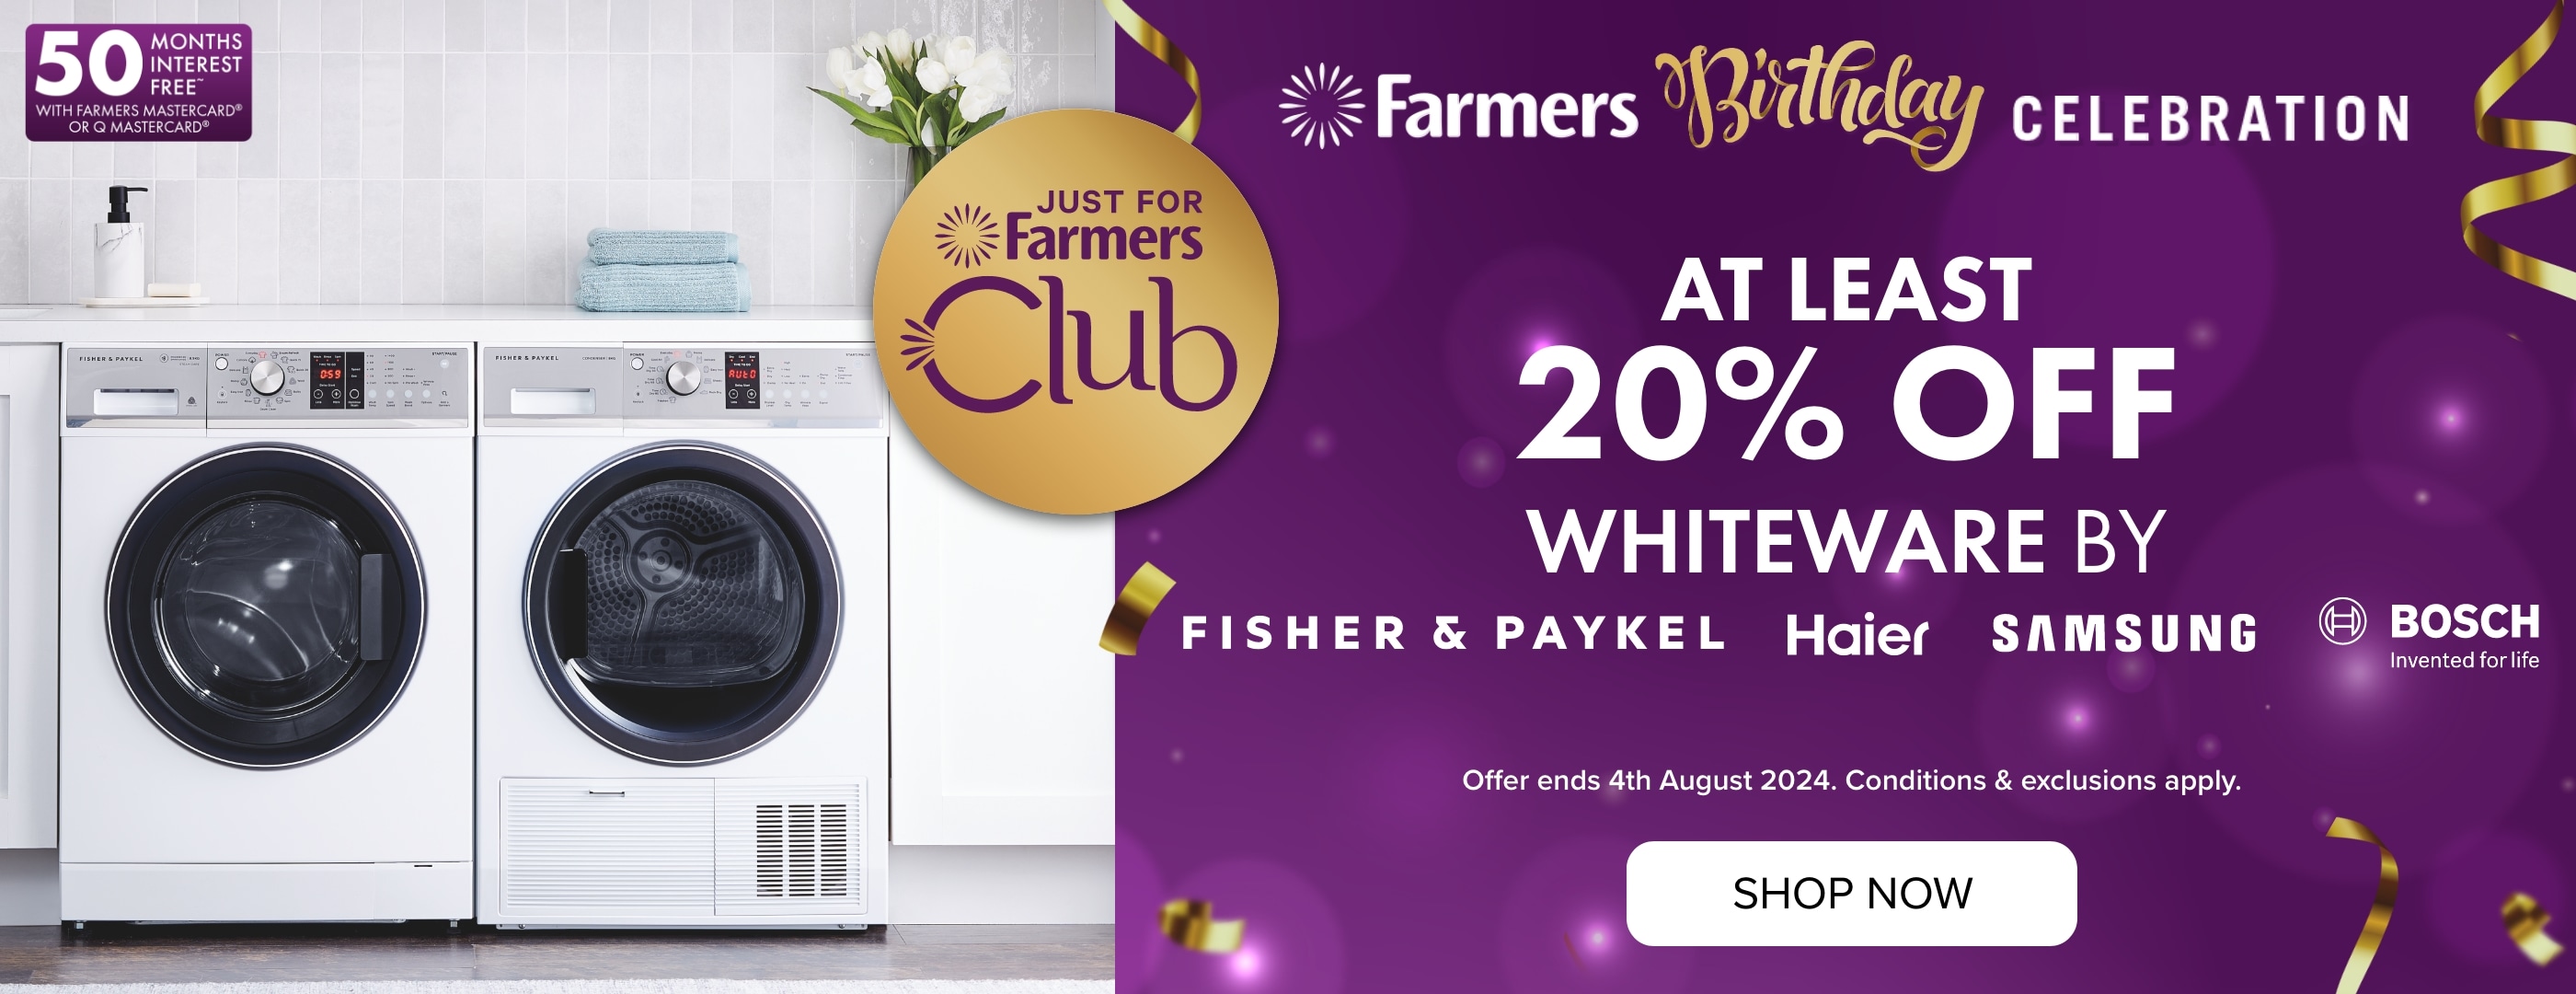 AT LEAST 20% OFF Whiteware by Fisher & Paykel, Samsung, Bosch & Haier